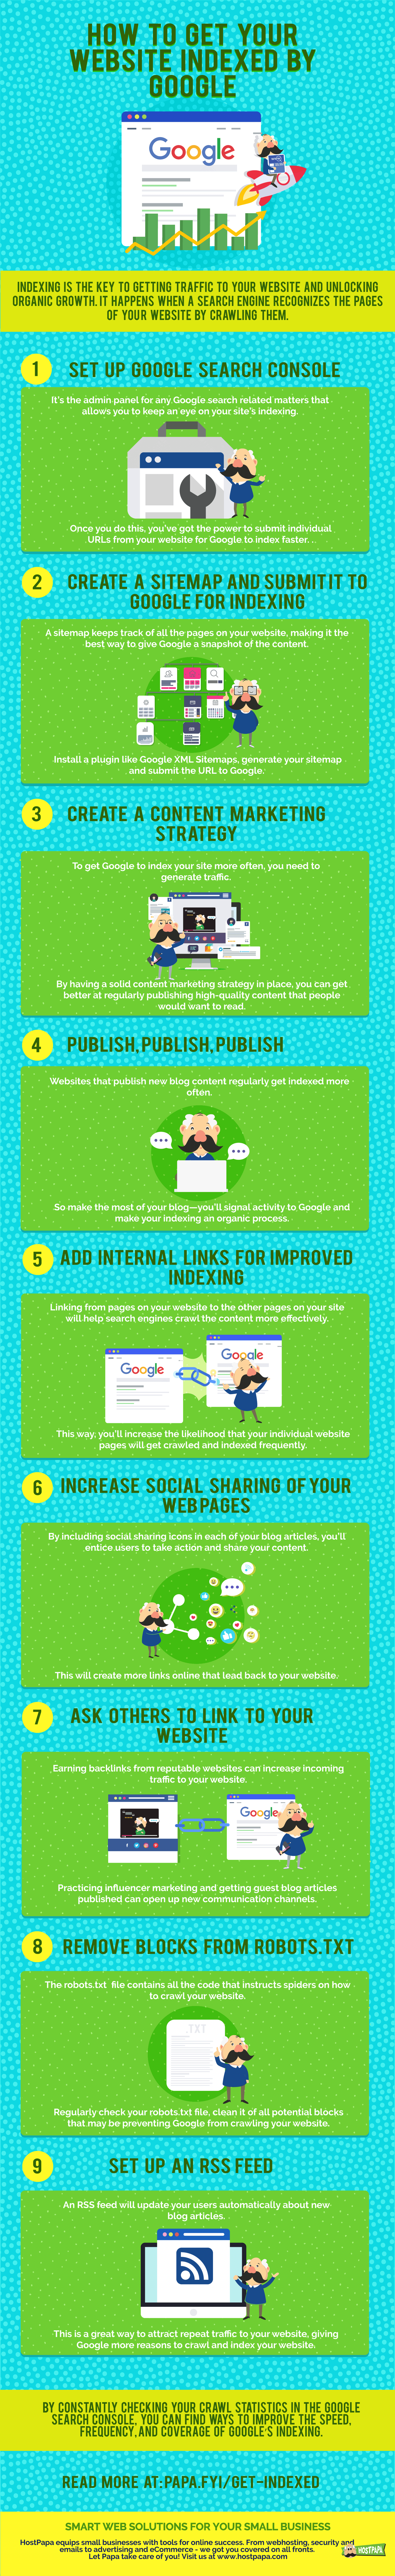 infographic about getting your website indexed by Google